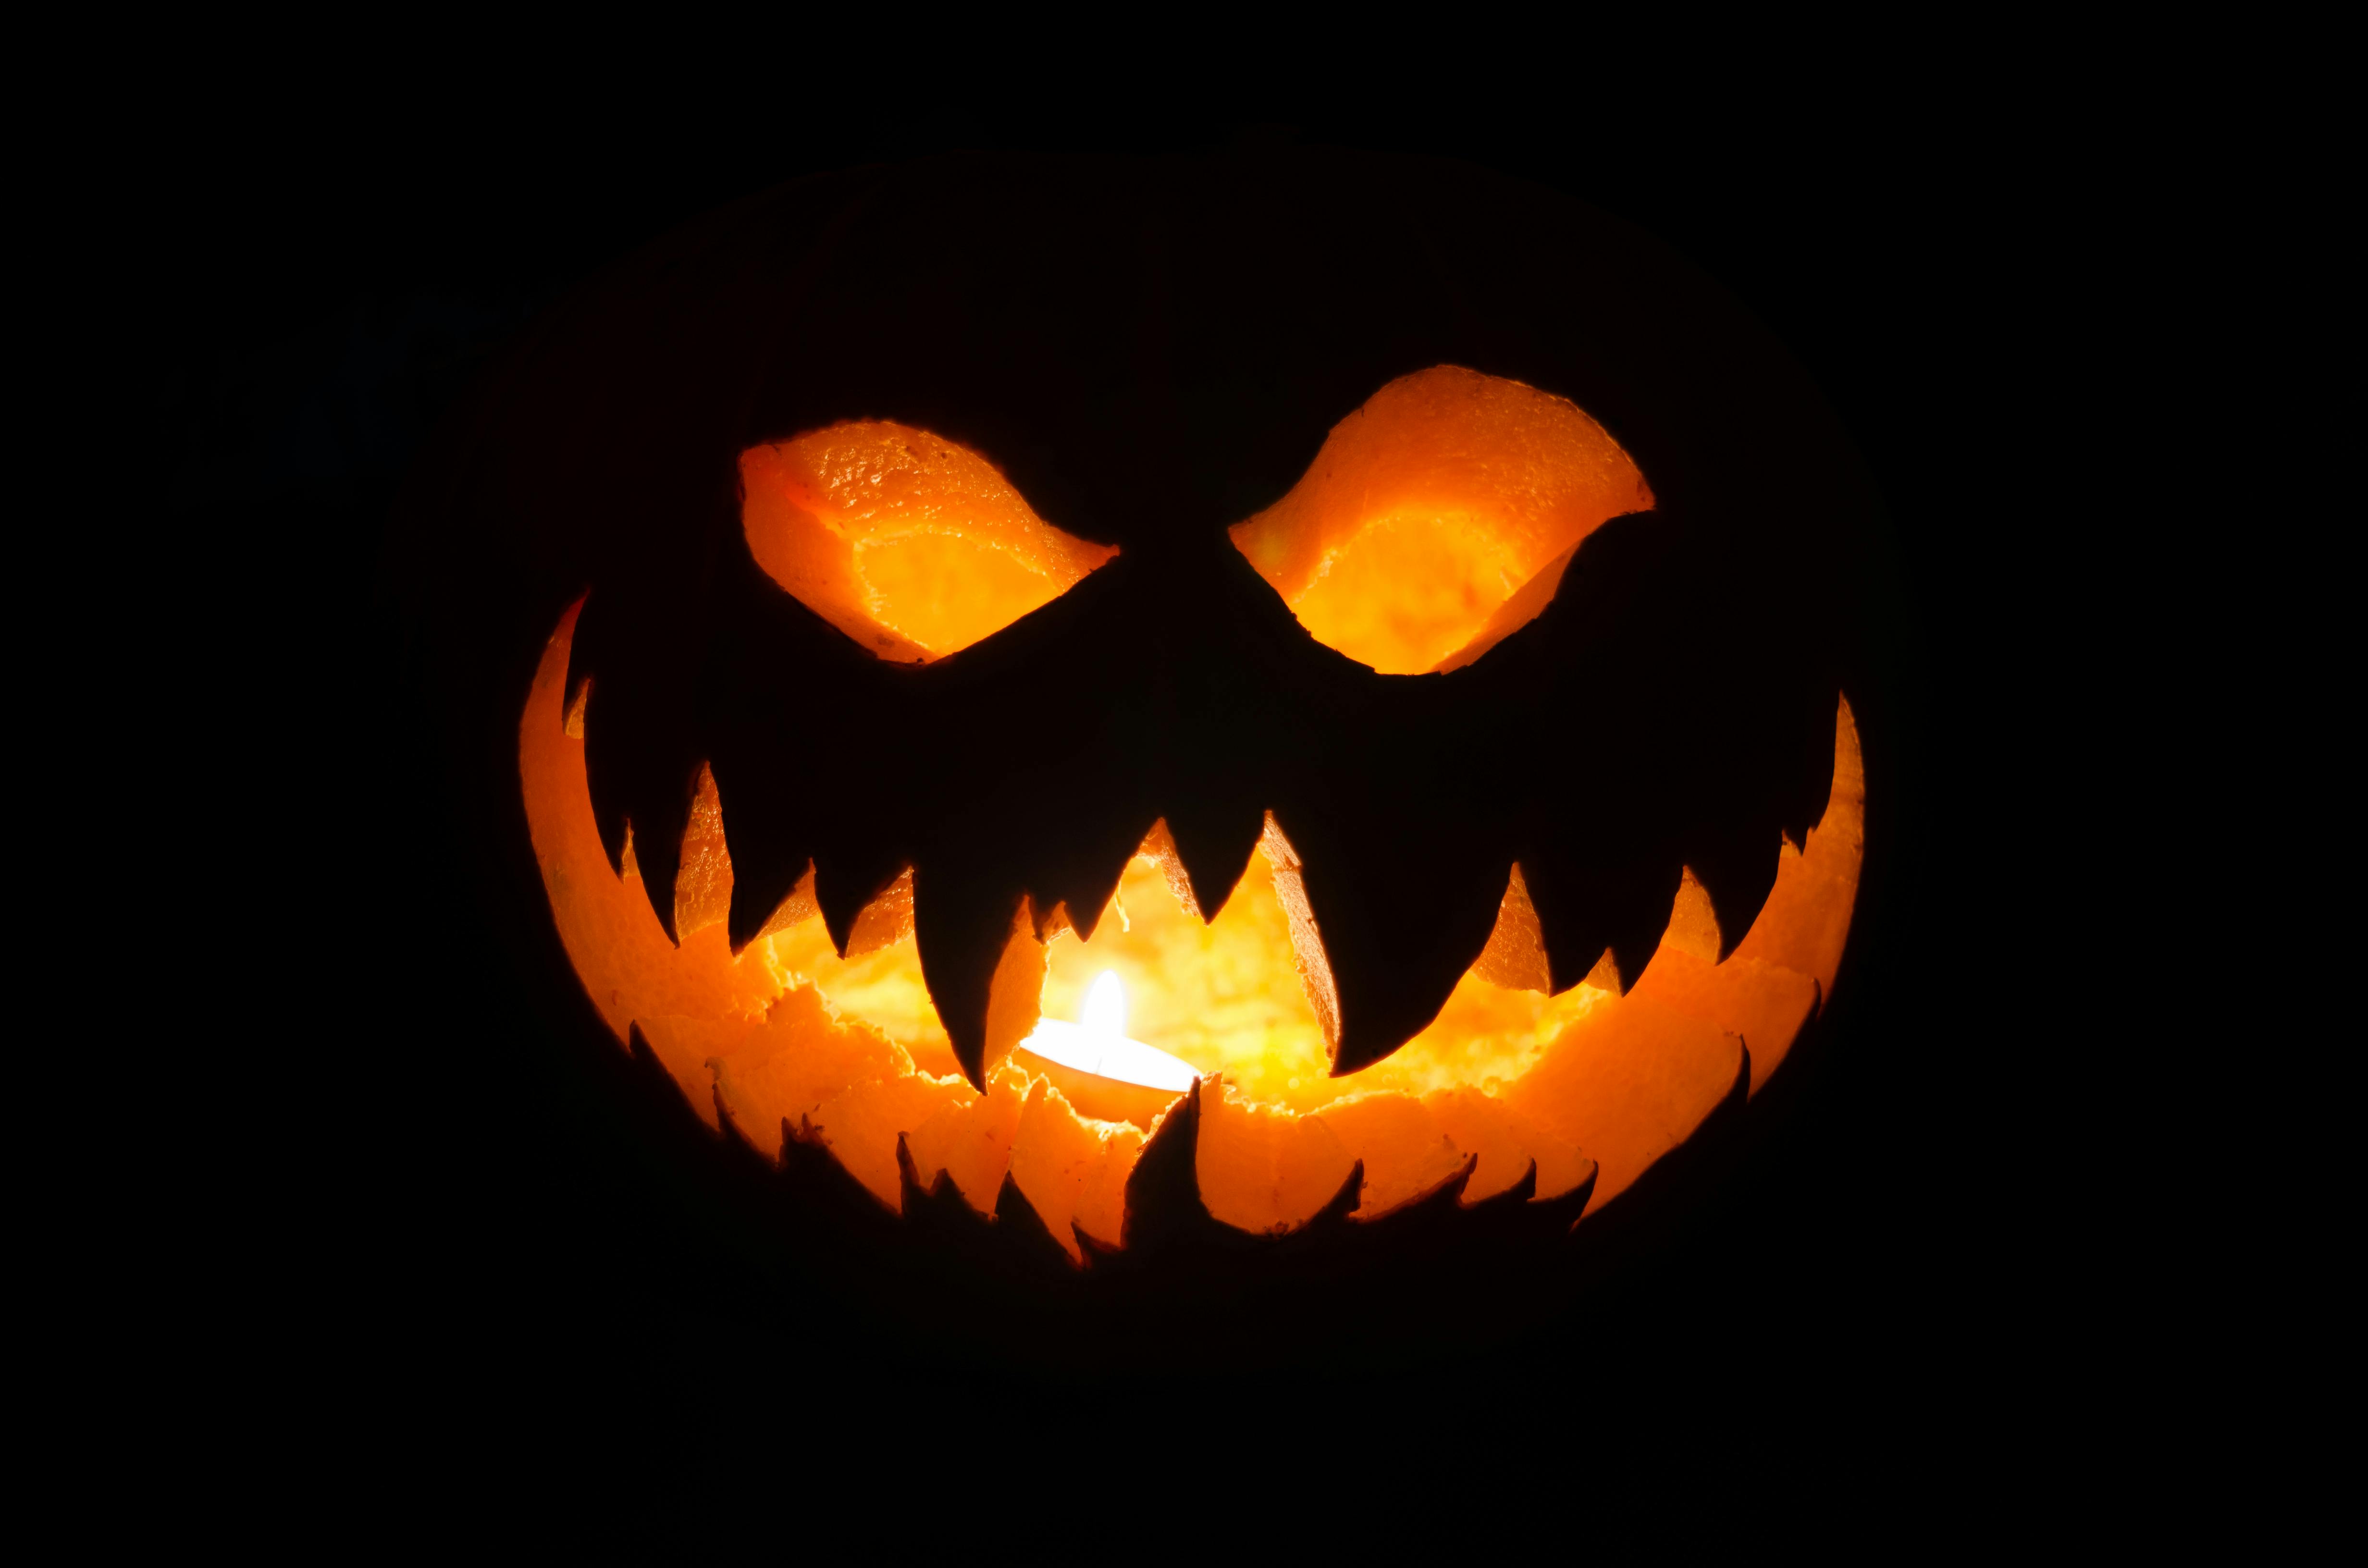 scary face pumpkin carving patterns